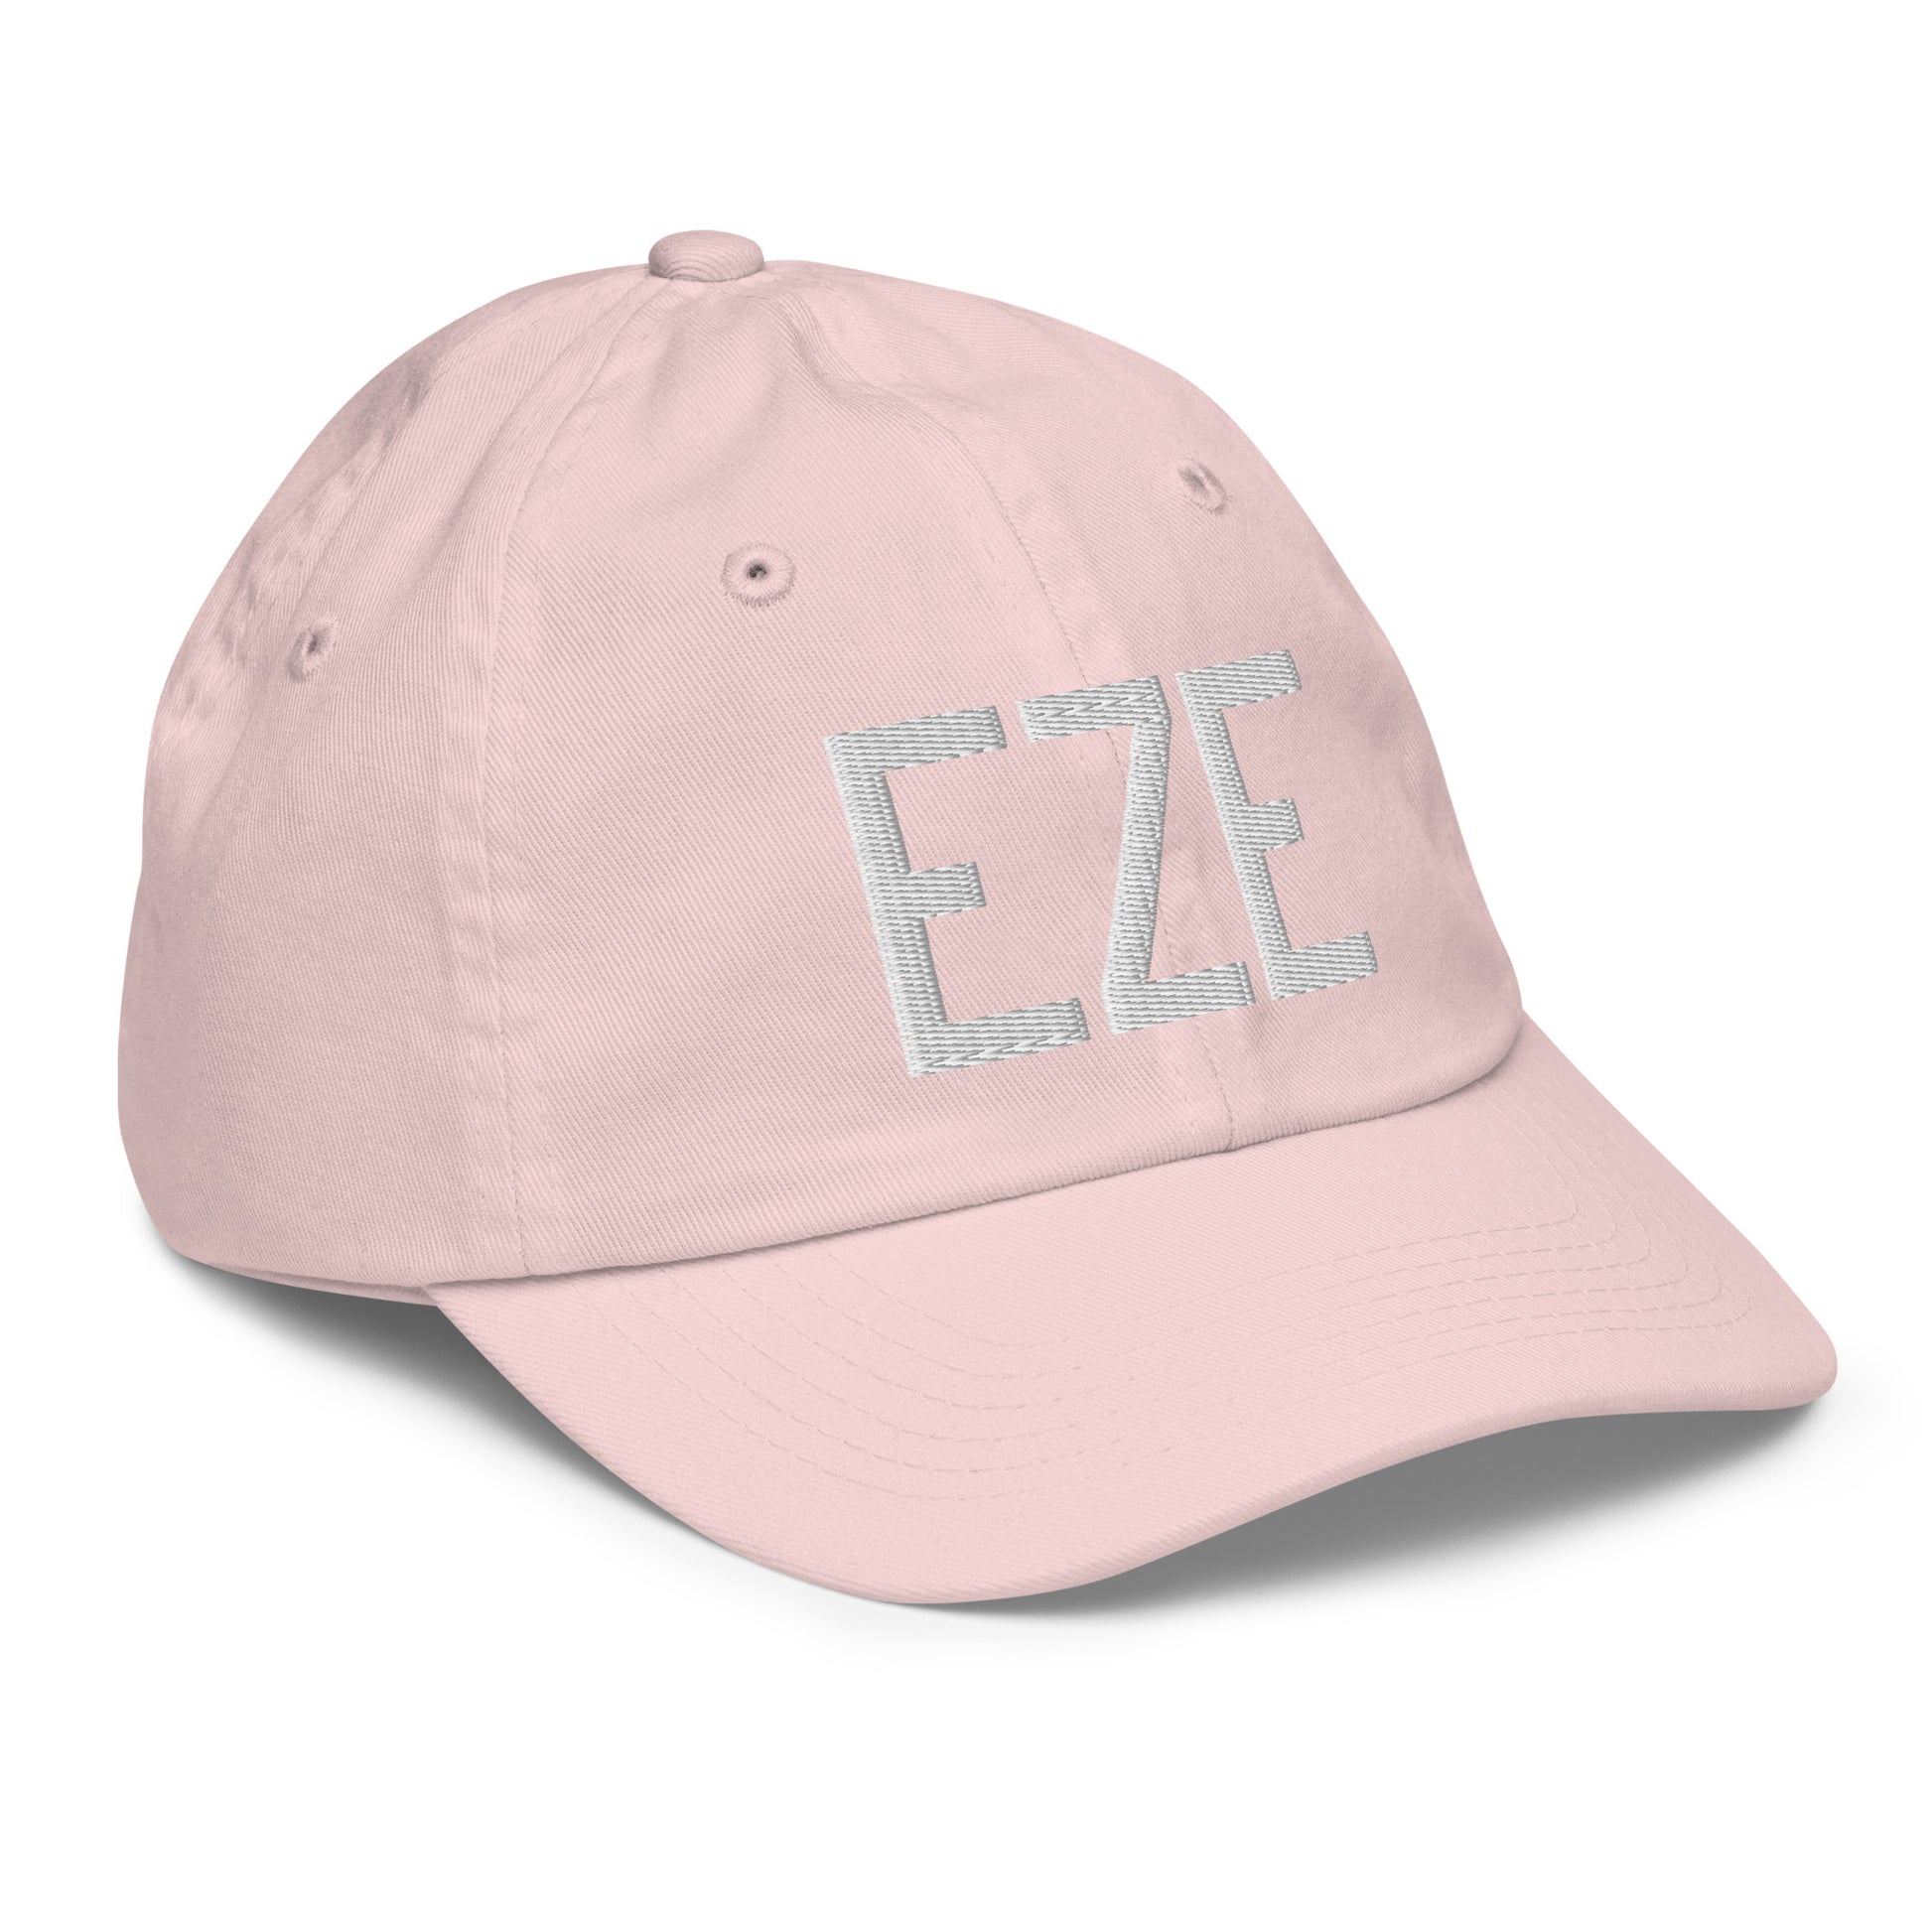 Airport Code Kid's Baseball Cap - White • EZE Buenos Aires • YHM Designs - Image 32